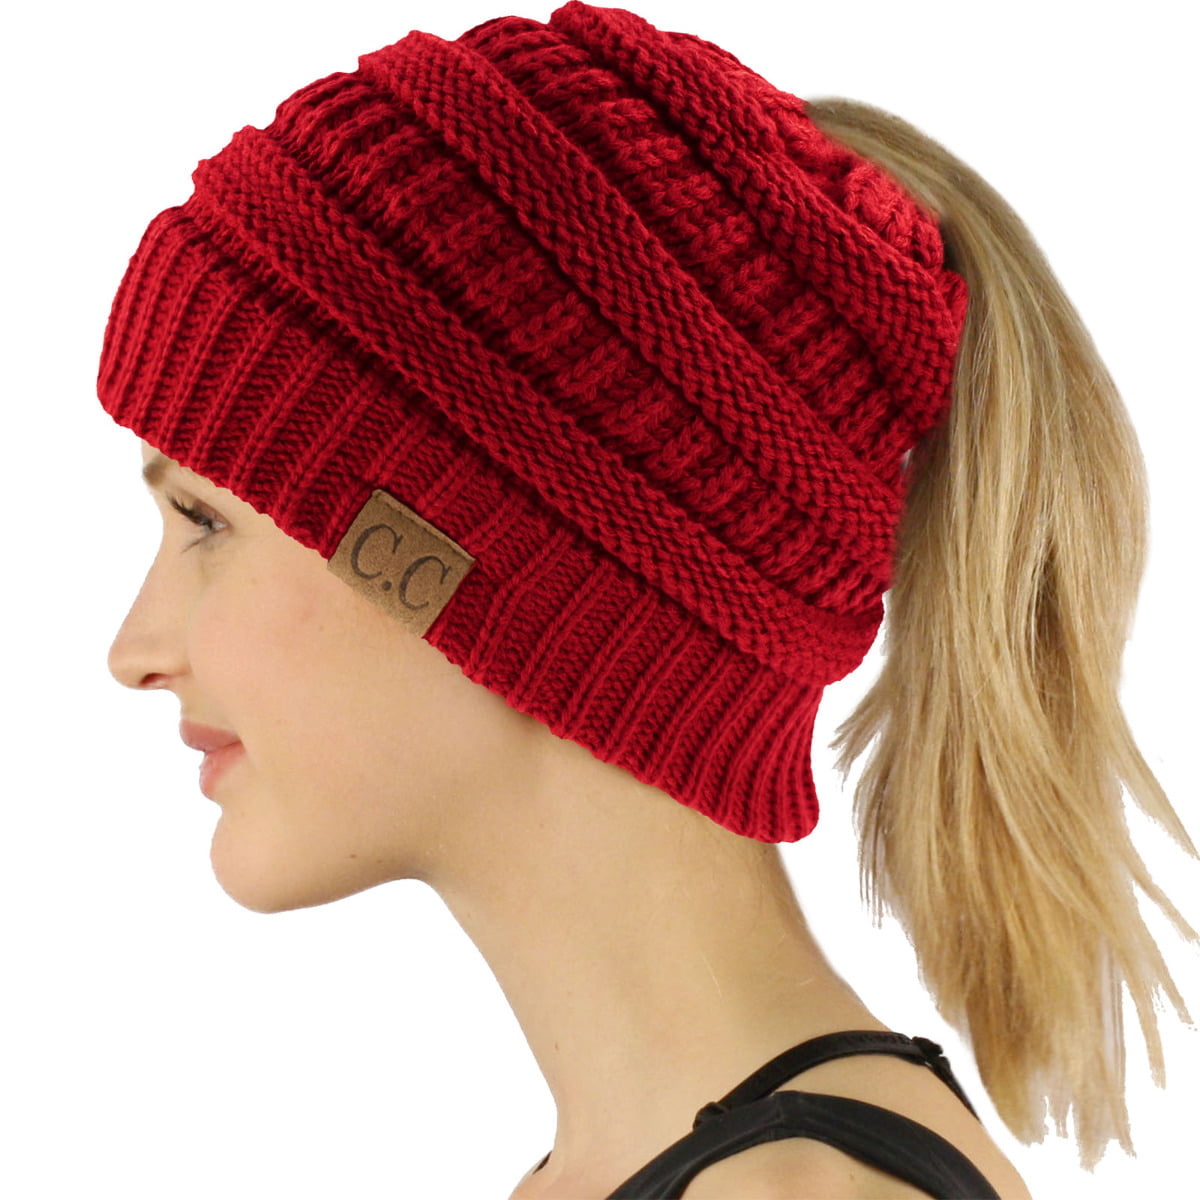 C.C Exclusives Soft Stretch Cable Knit Messy Bun Ponytail Beanie Winter Hat for Women MB-20A CCB-1 